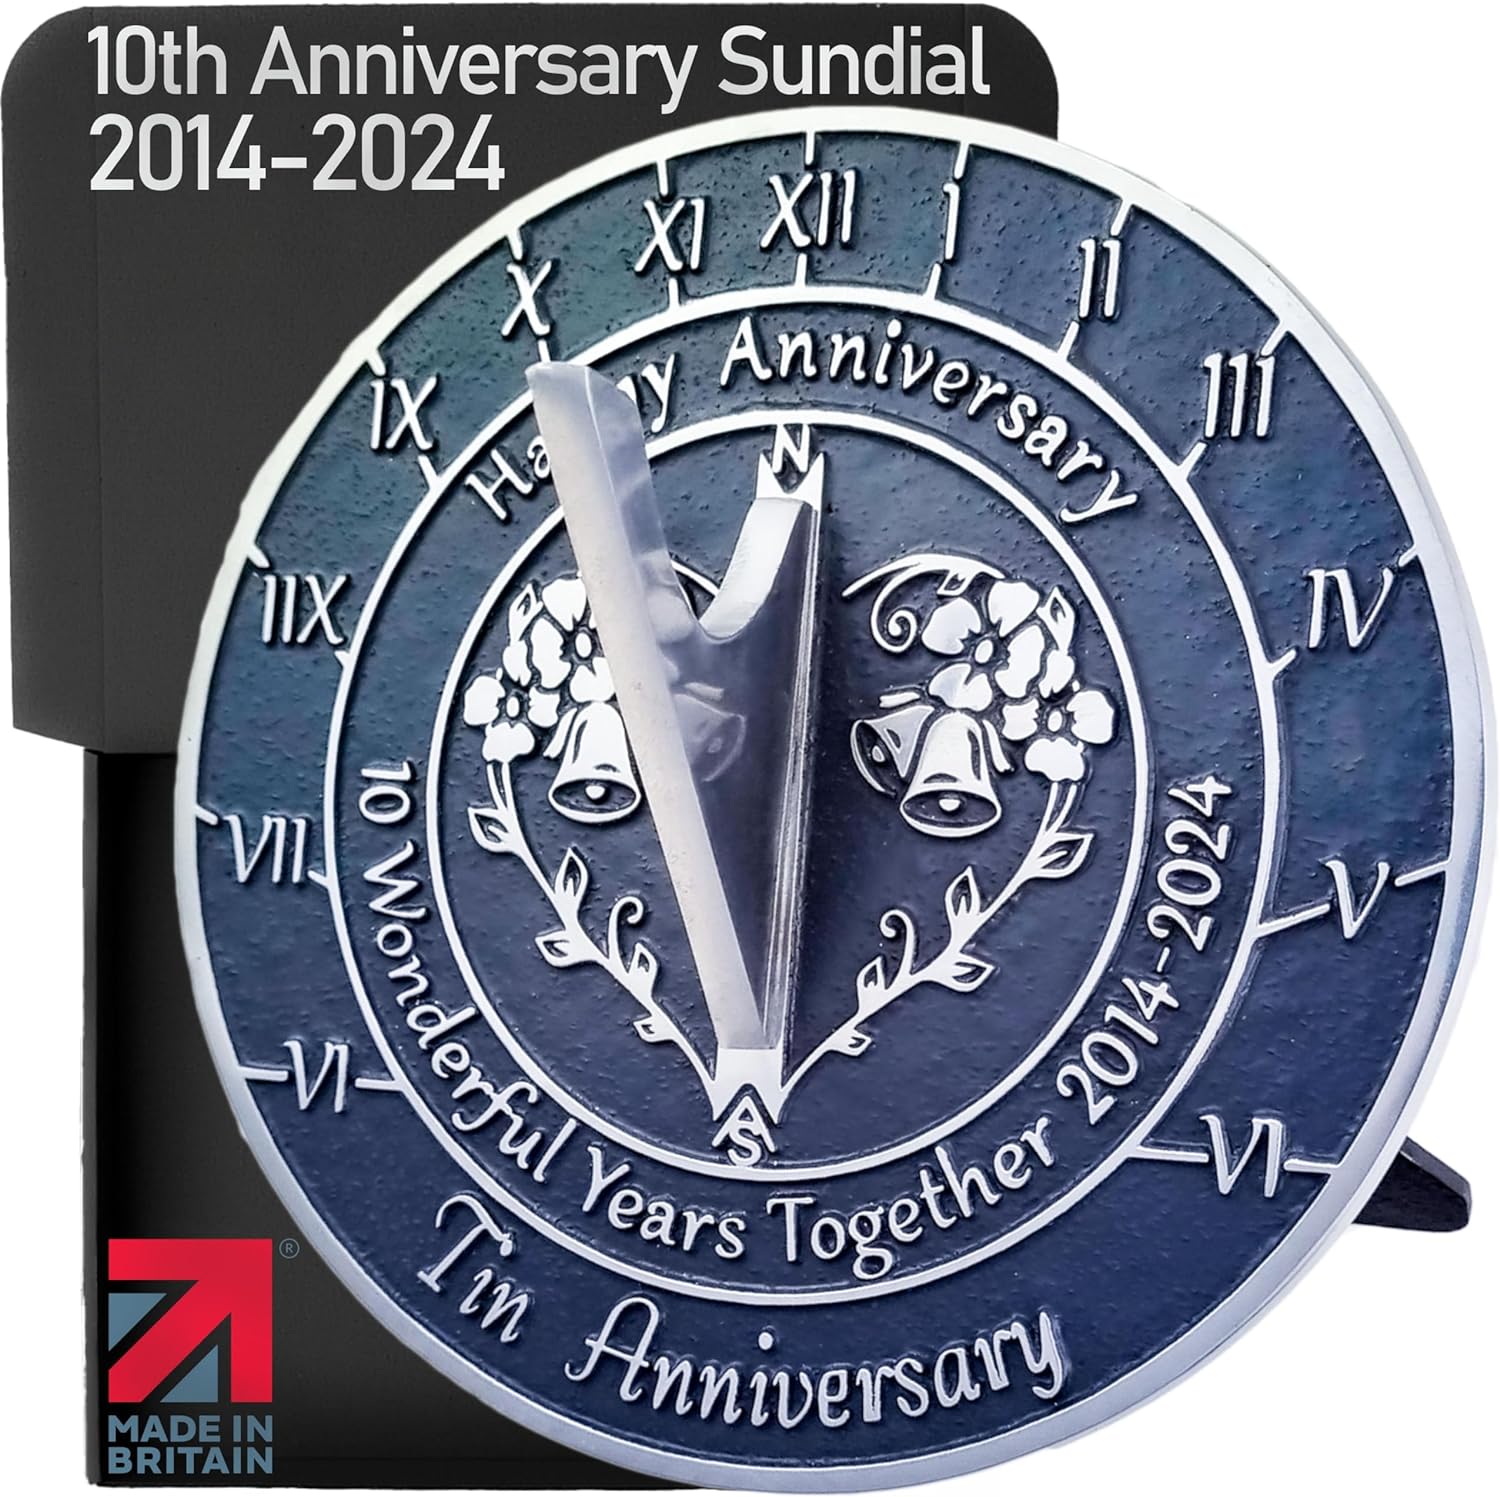 Anniversary Sundial Gift for 10th Tin Wedding Anniversary in 2024 - Recycled Metal Home Decor Or Garden Present Idea - Handmade in UK for Him, Her Parents Or Couples 10 Year Celebration